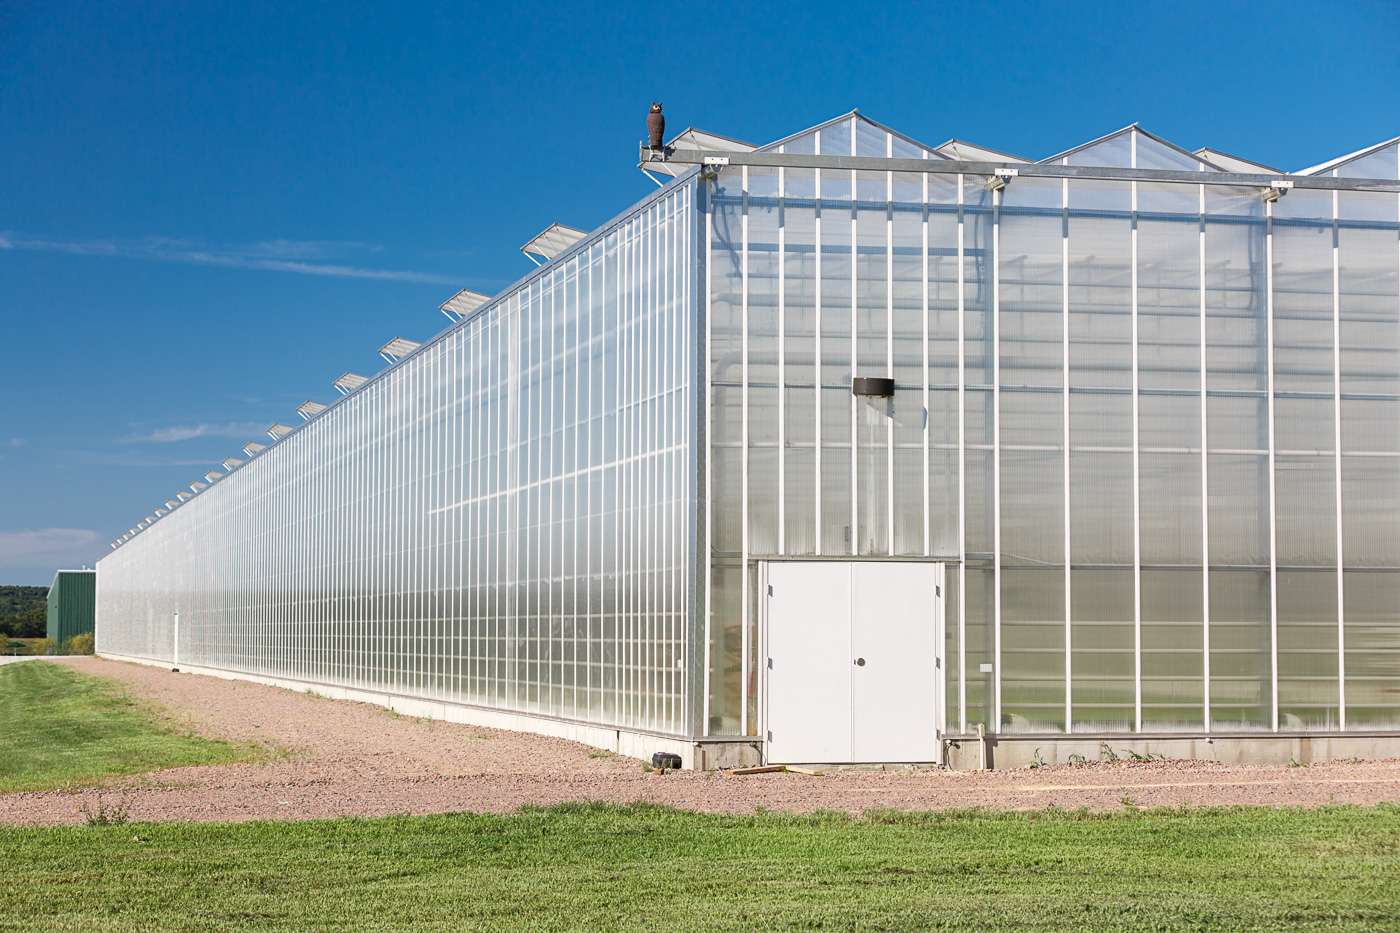 agriculture photographer Midwest - the exterior of a large hydroponic greenhouse